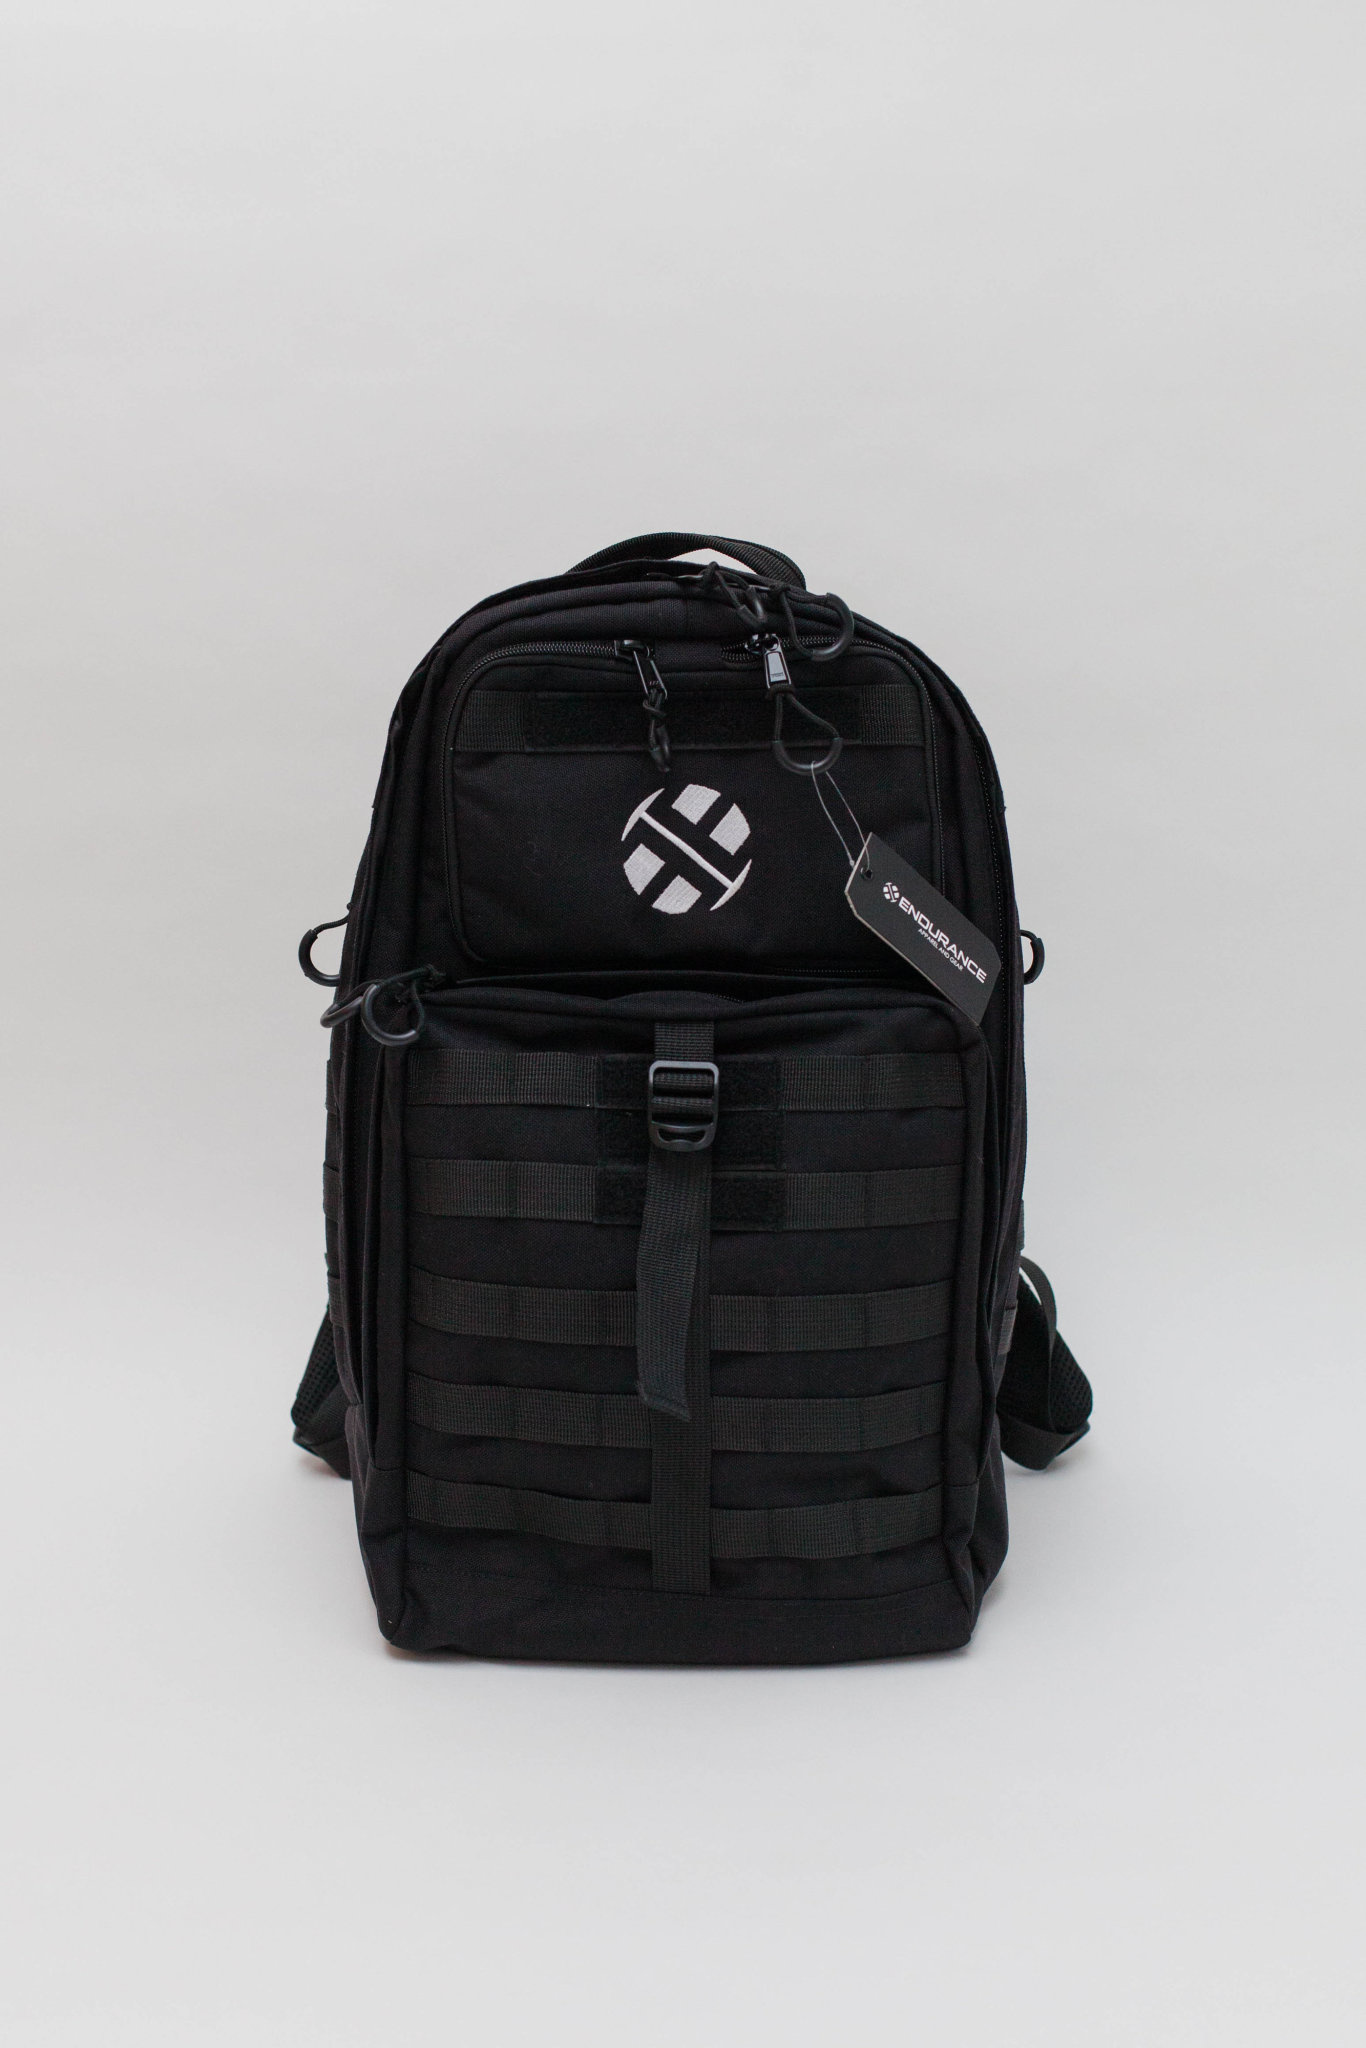 Grit Military Backpack - Apparel and Gear, LLC